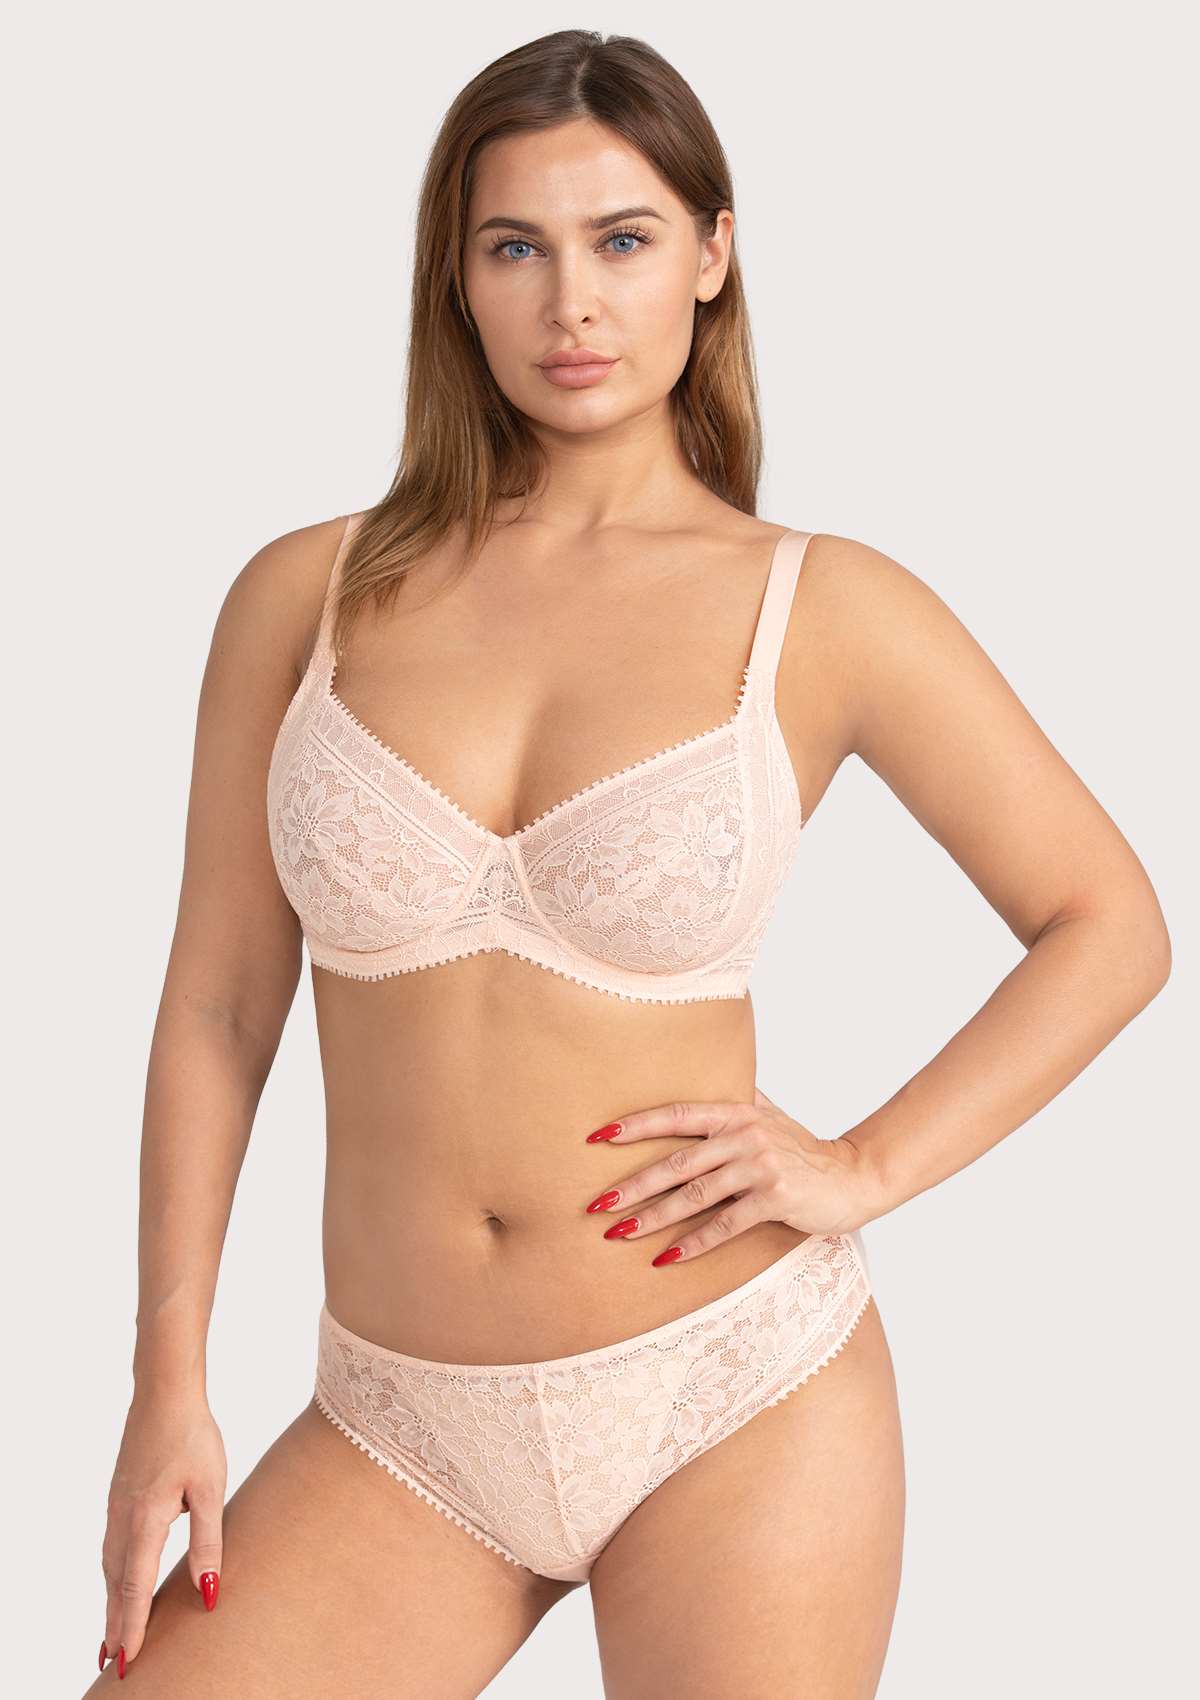 HSIA Silene Floral Delicate Unlined Lace Soft Cup Uplift Bra - Heavenly Pink / 40 / DD/E